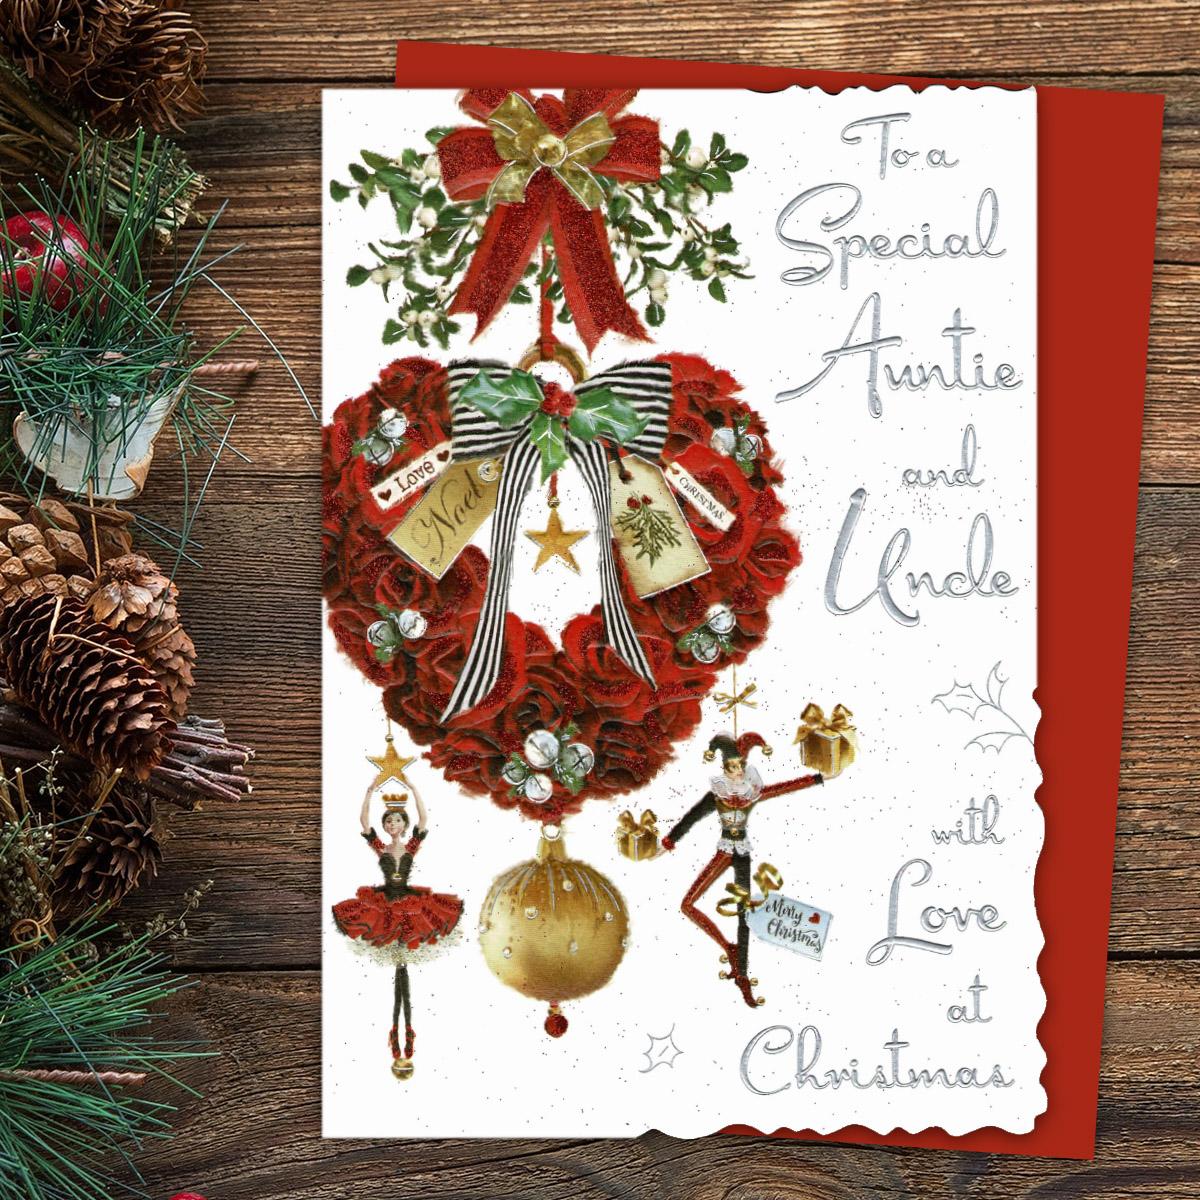 Special Auntie And Uncle Christmas Garland Card Front Image